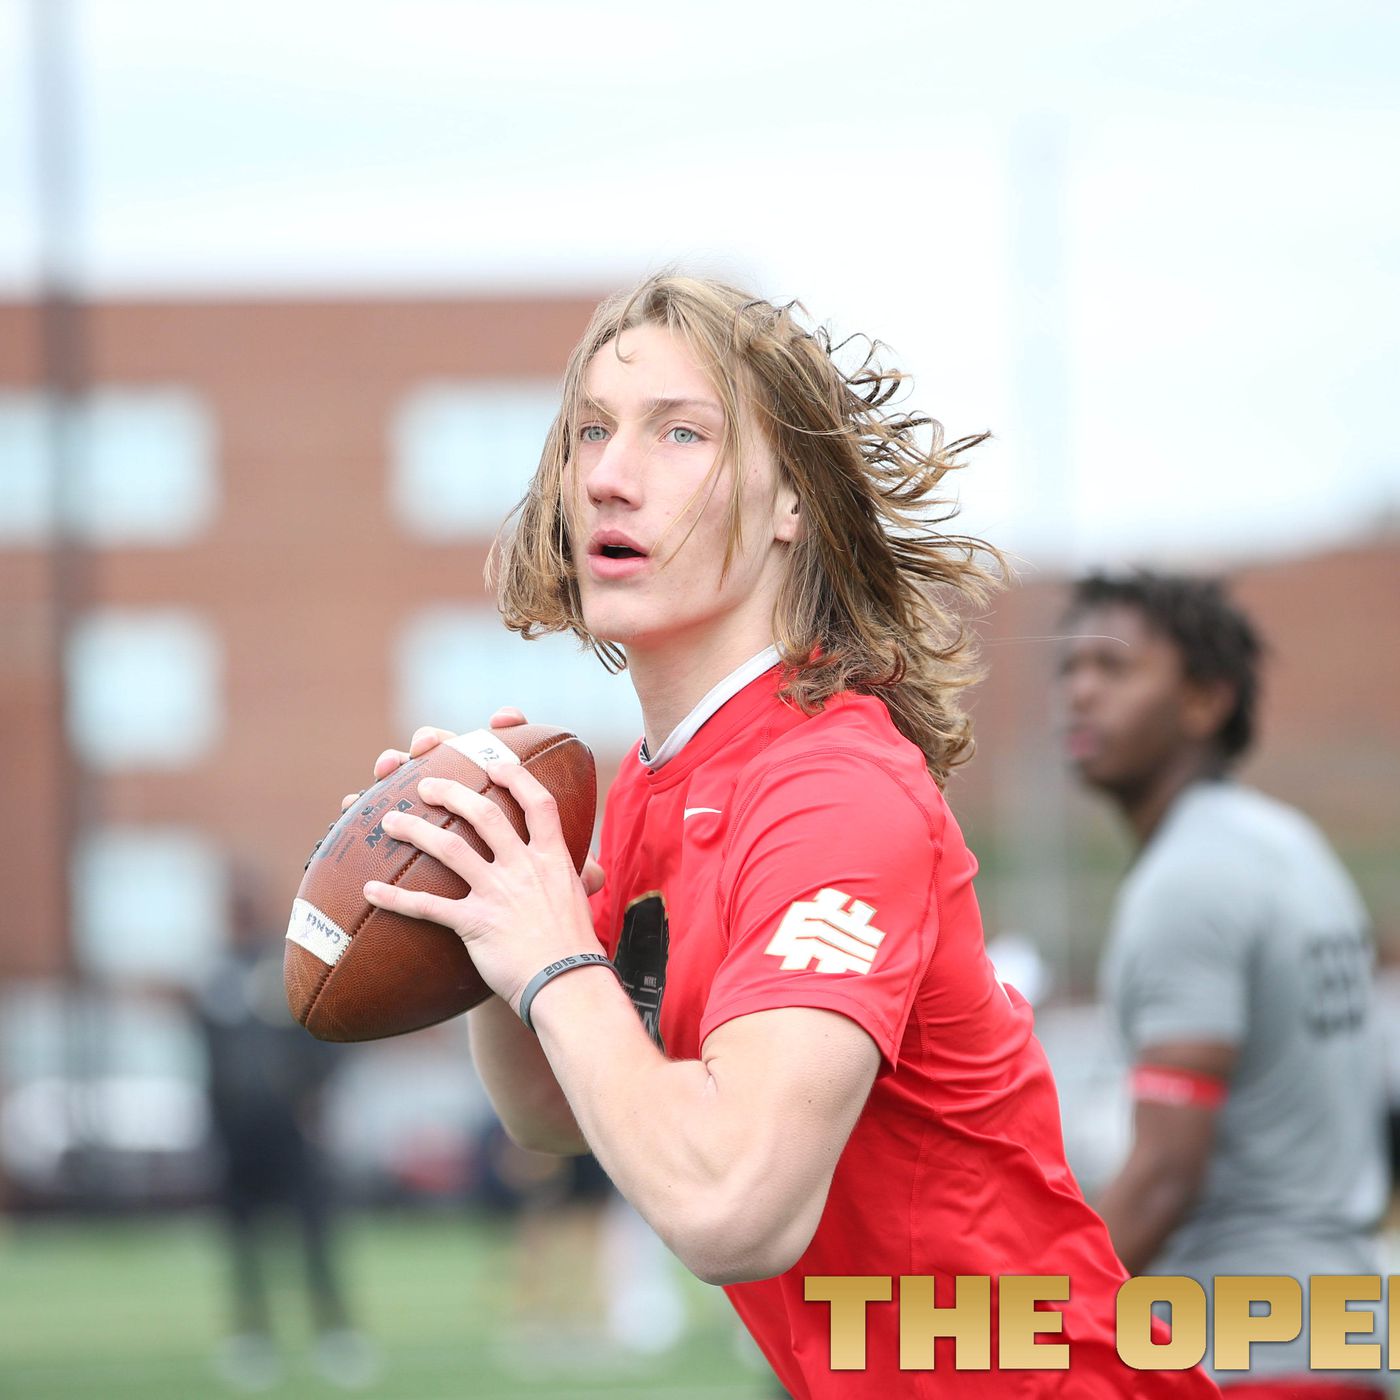 Michigan contacts No. 1 recruit Trevor Lawrence - Maize n Brew